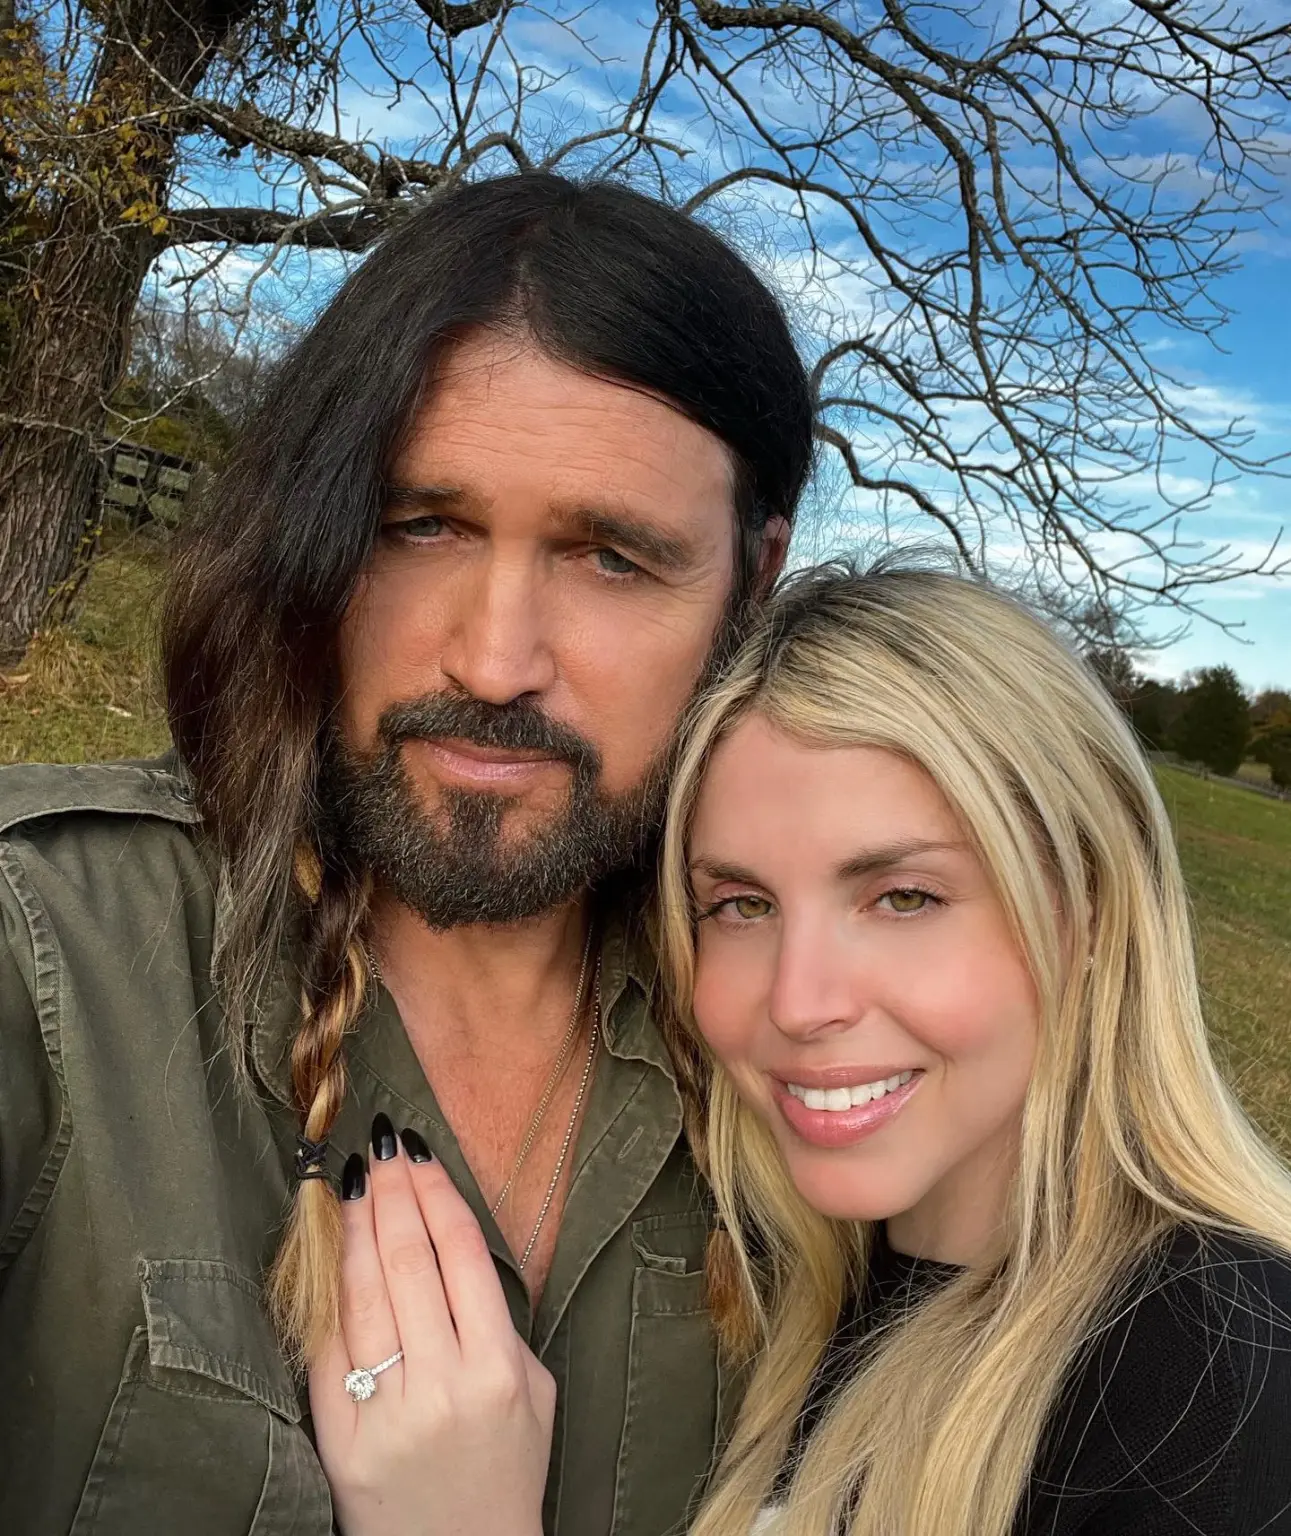 Firerose Accuses Billy Ray Cyrus of Abuse Amid Nightmare Divorce